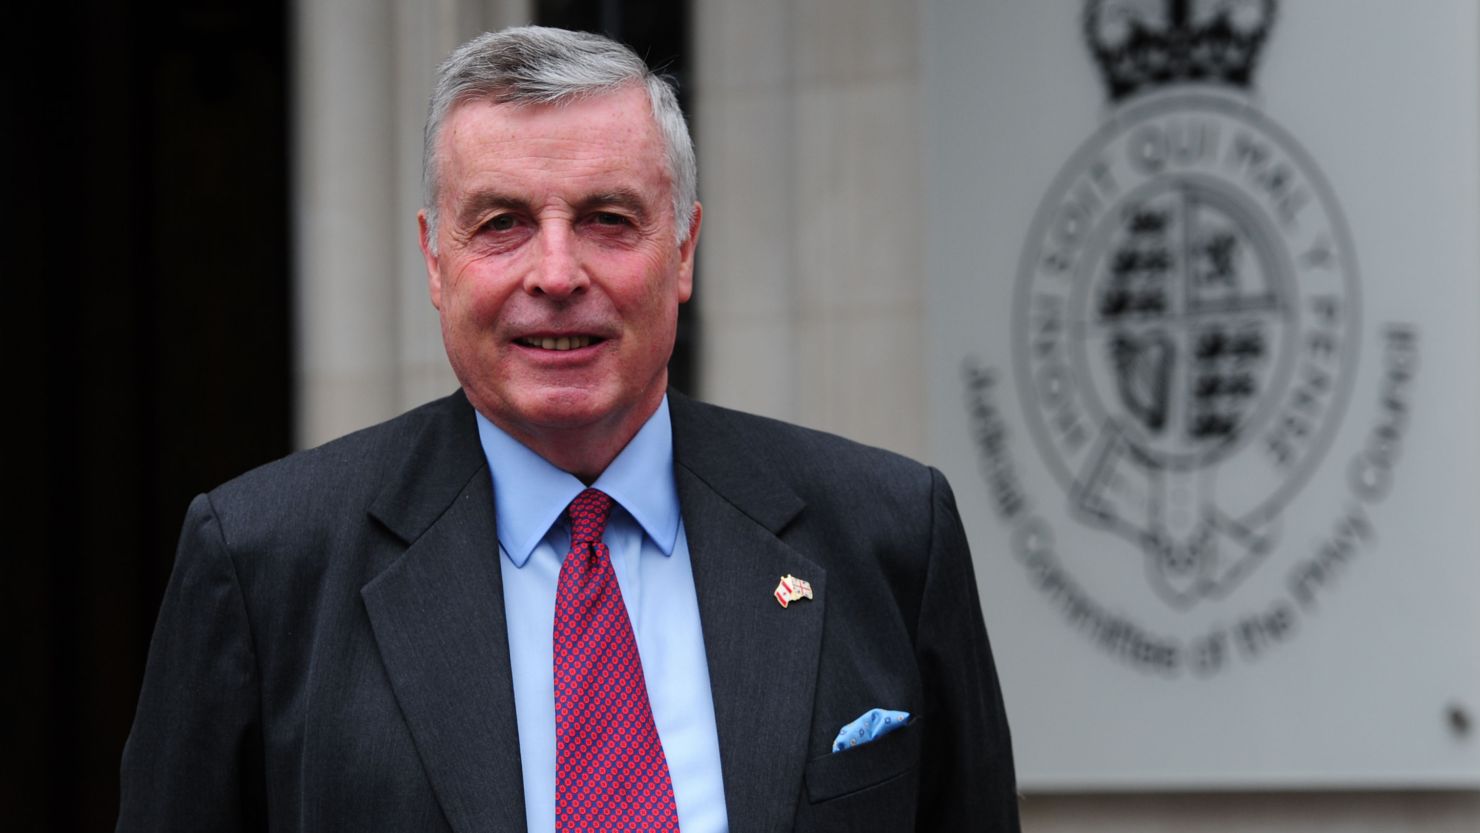 John Walker said he was "thrilled" with the UK Supreme Court decision in London on Wednesday.